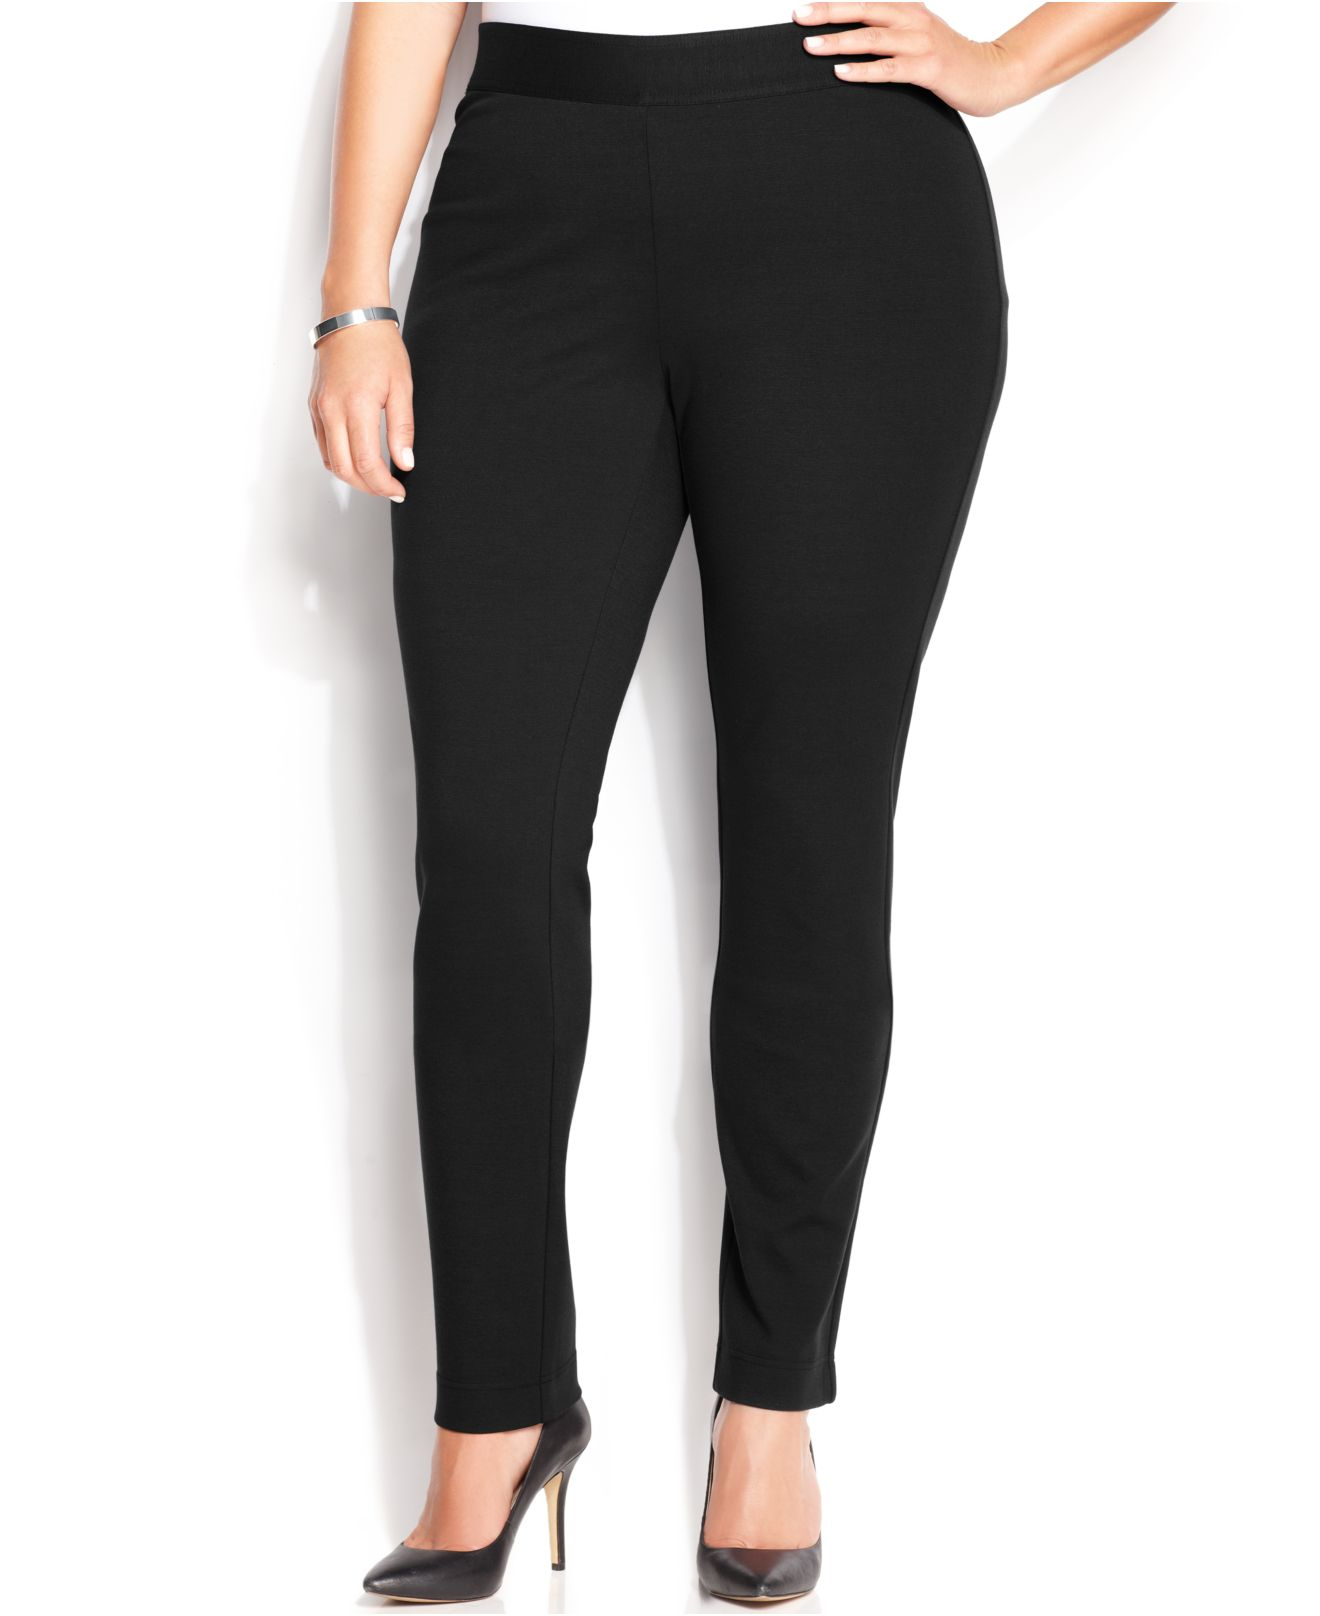 Inc international concepts Plus Size Pull-on Skinny Ponte Pants in Black | Lyst